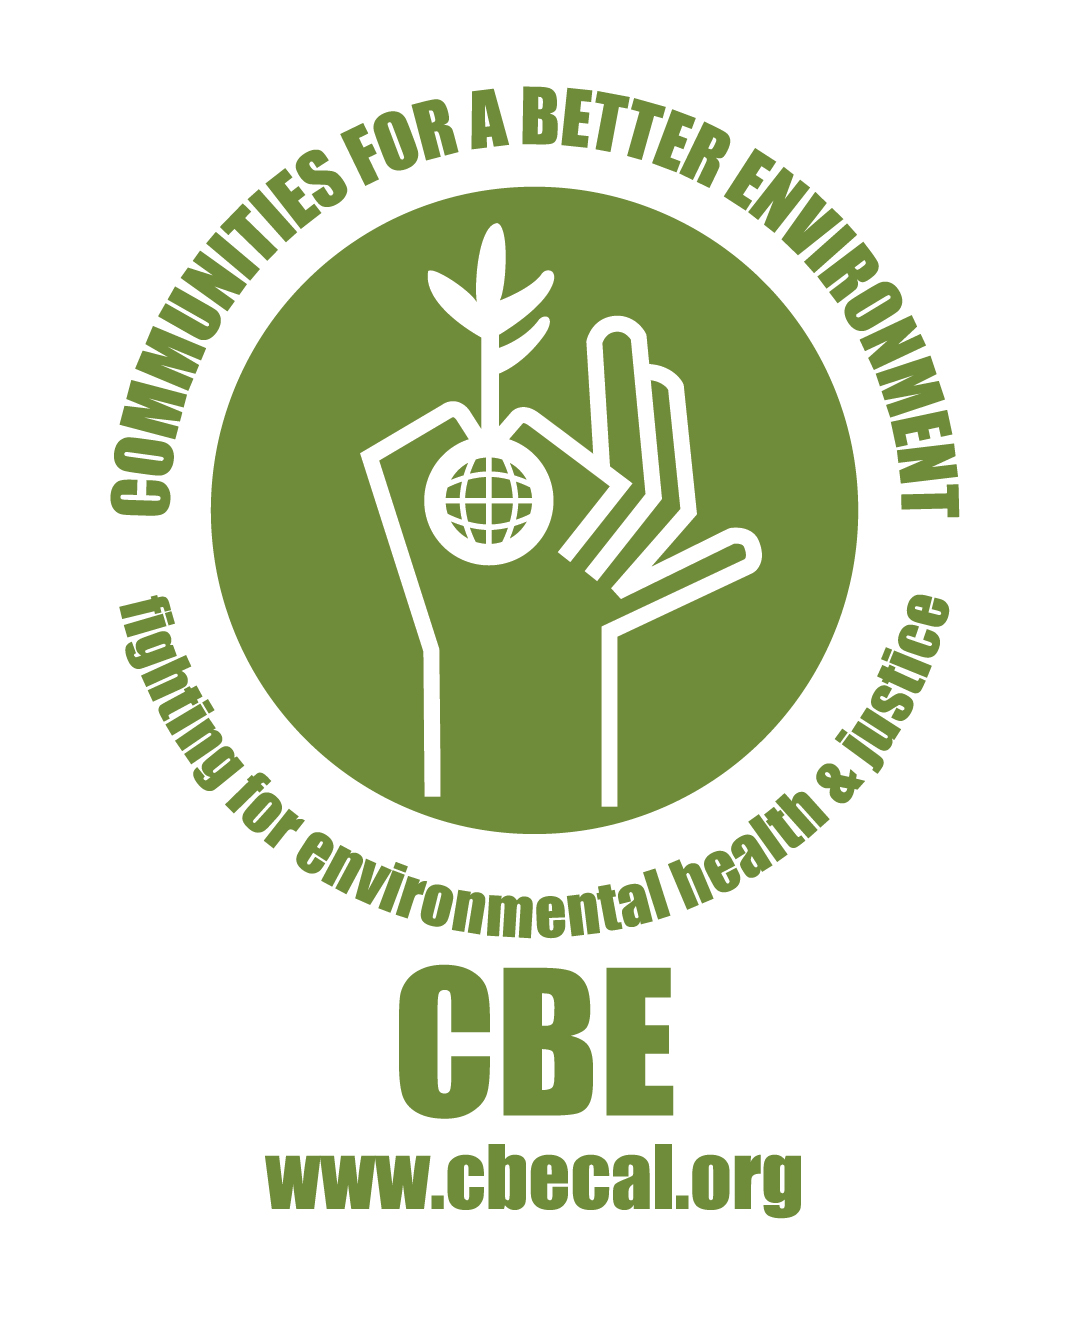 logo, says Communities For a Better Environment fighting for environmental health and justice, hand holding seed illustration